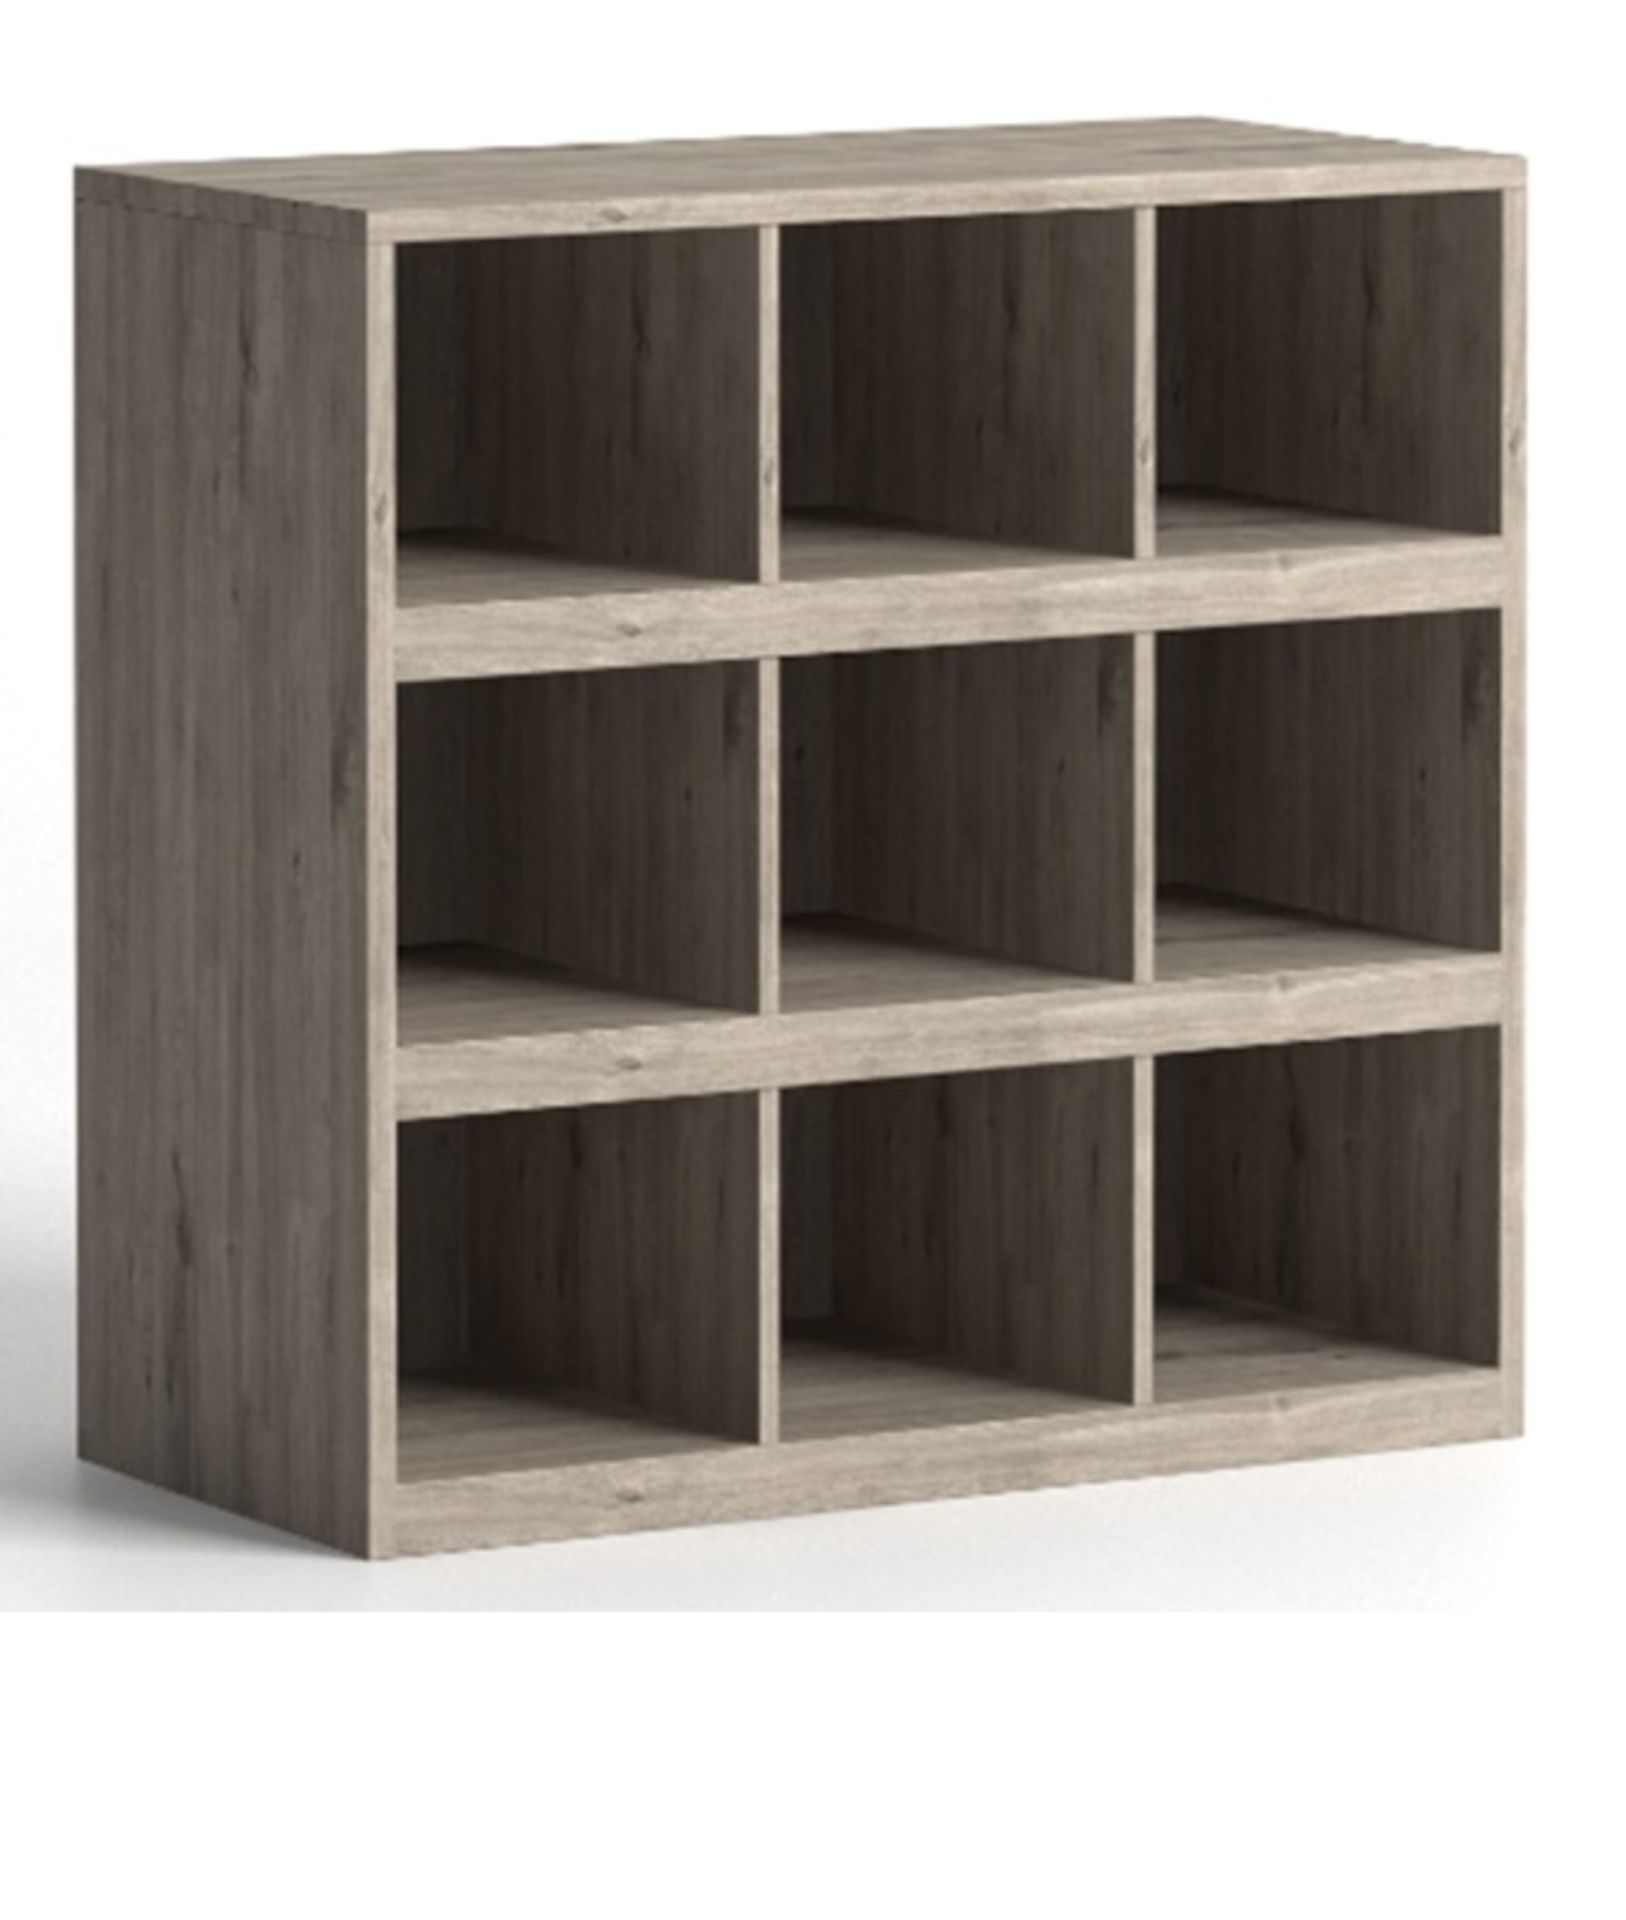 Boot Cubby- A Utility Piece With 9 Shoe Cubbies Crafted From Solid Scandinavian Pine. 85 x 40 x 81cm